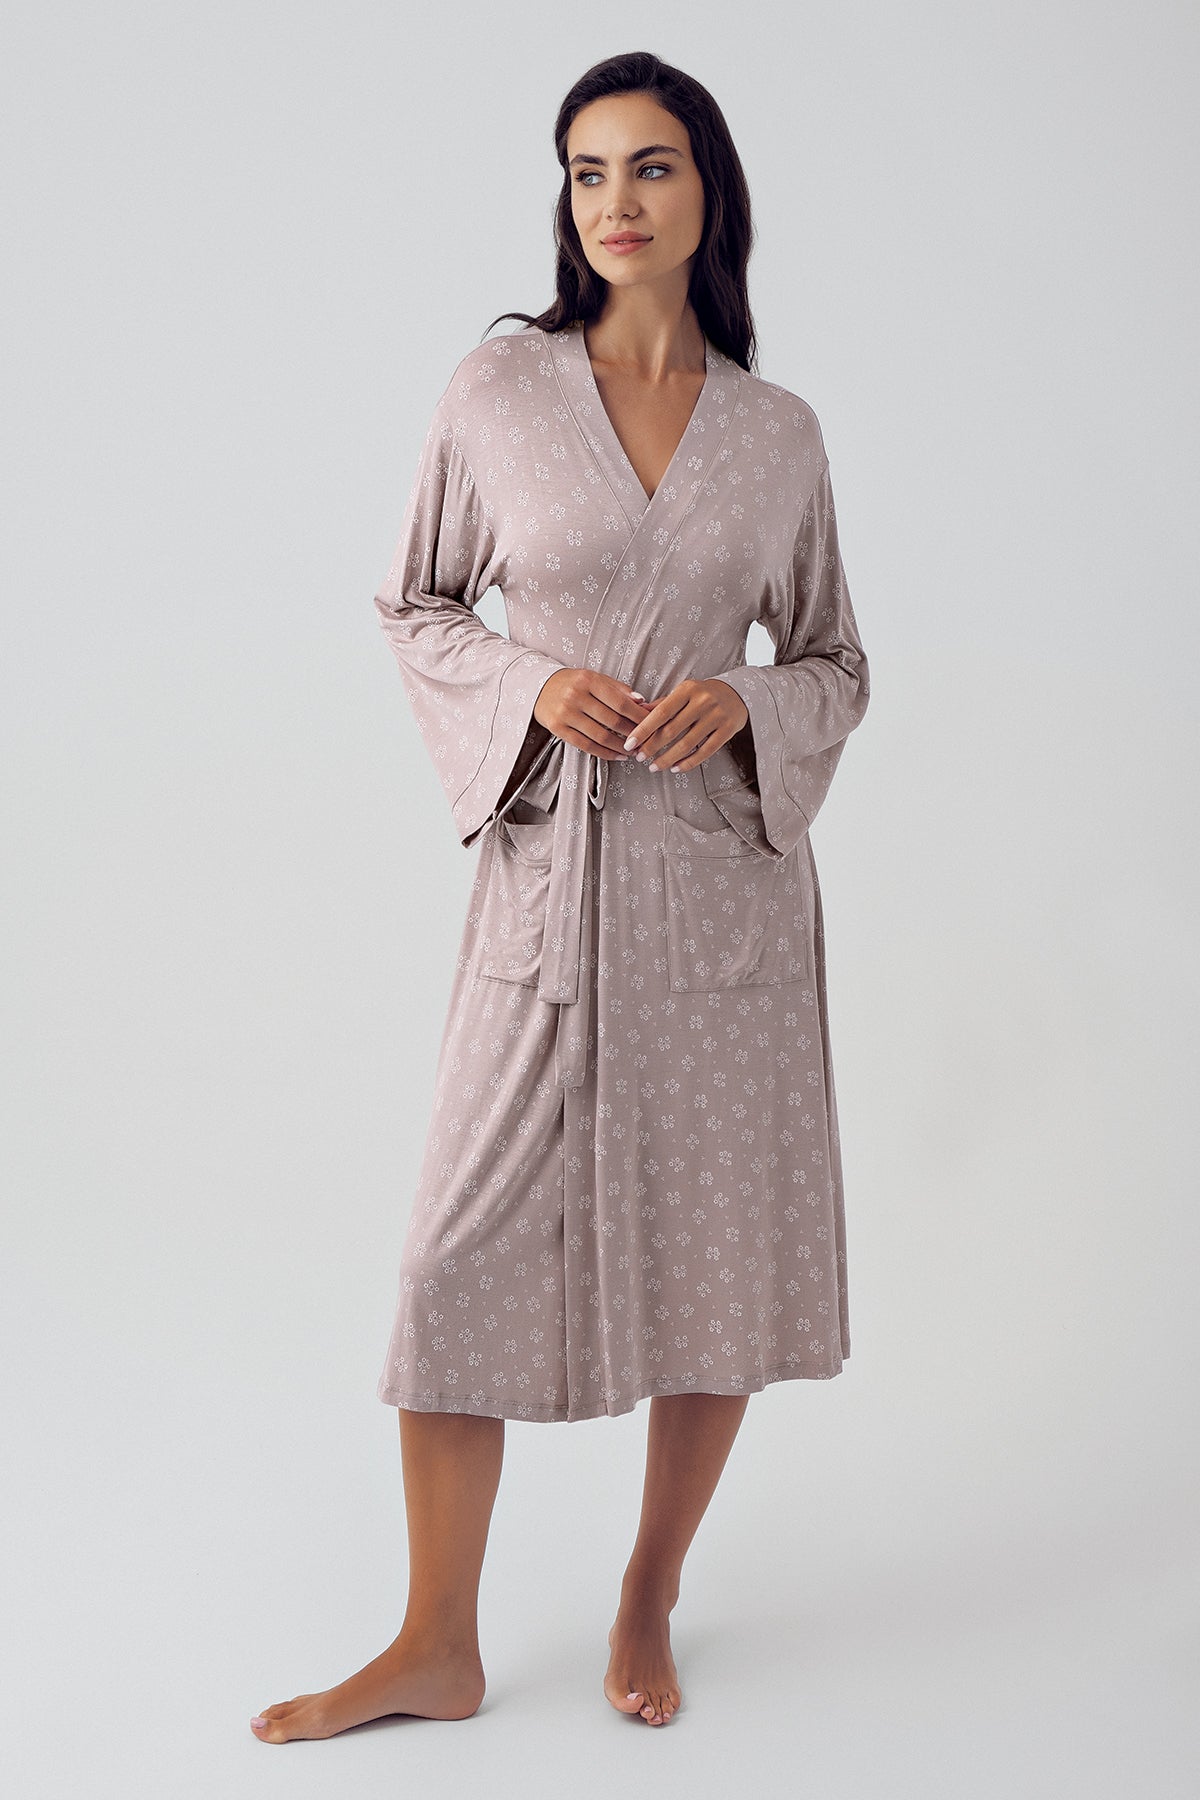 Shopymommy 15505 Patterned Maternity Robe Coffee